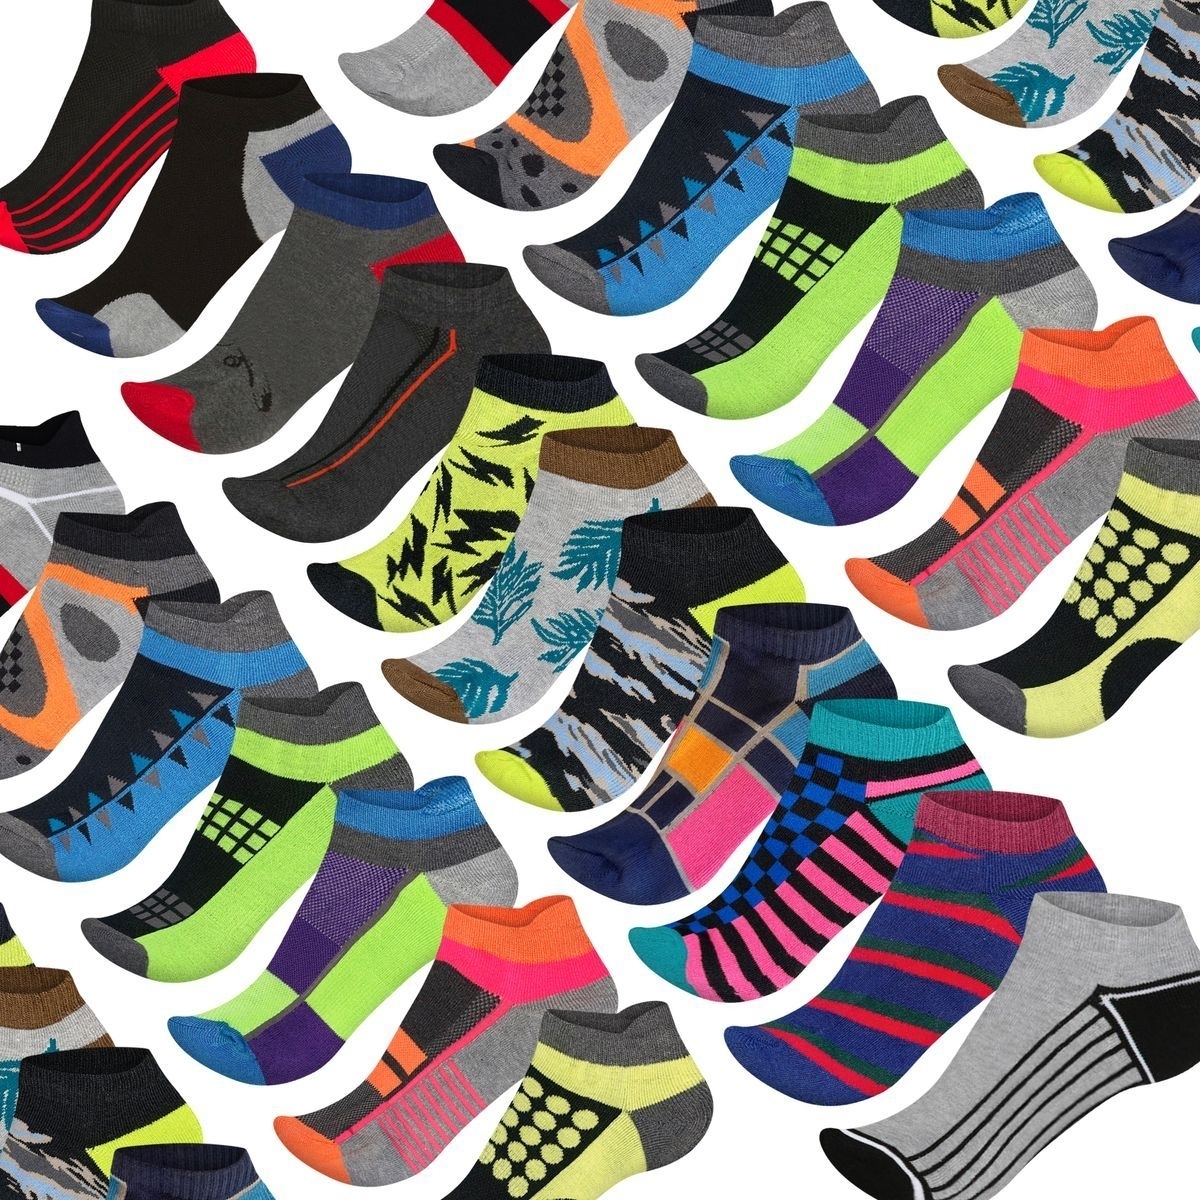 30-Pairs: Men's Moisture Wicking Mesh Performance Ankle Low Cut Cushion Athletic Sole Socks